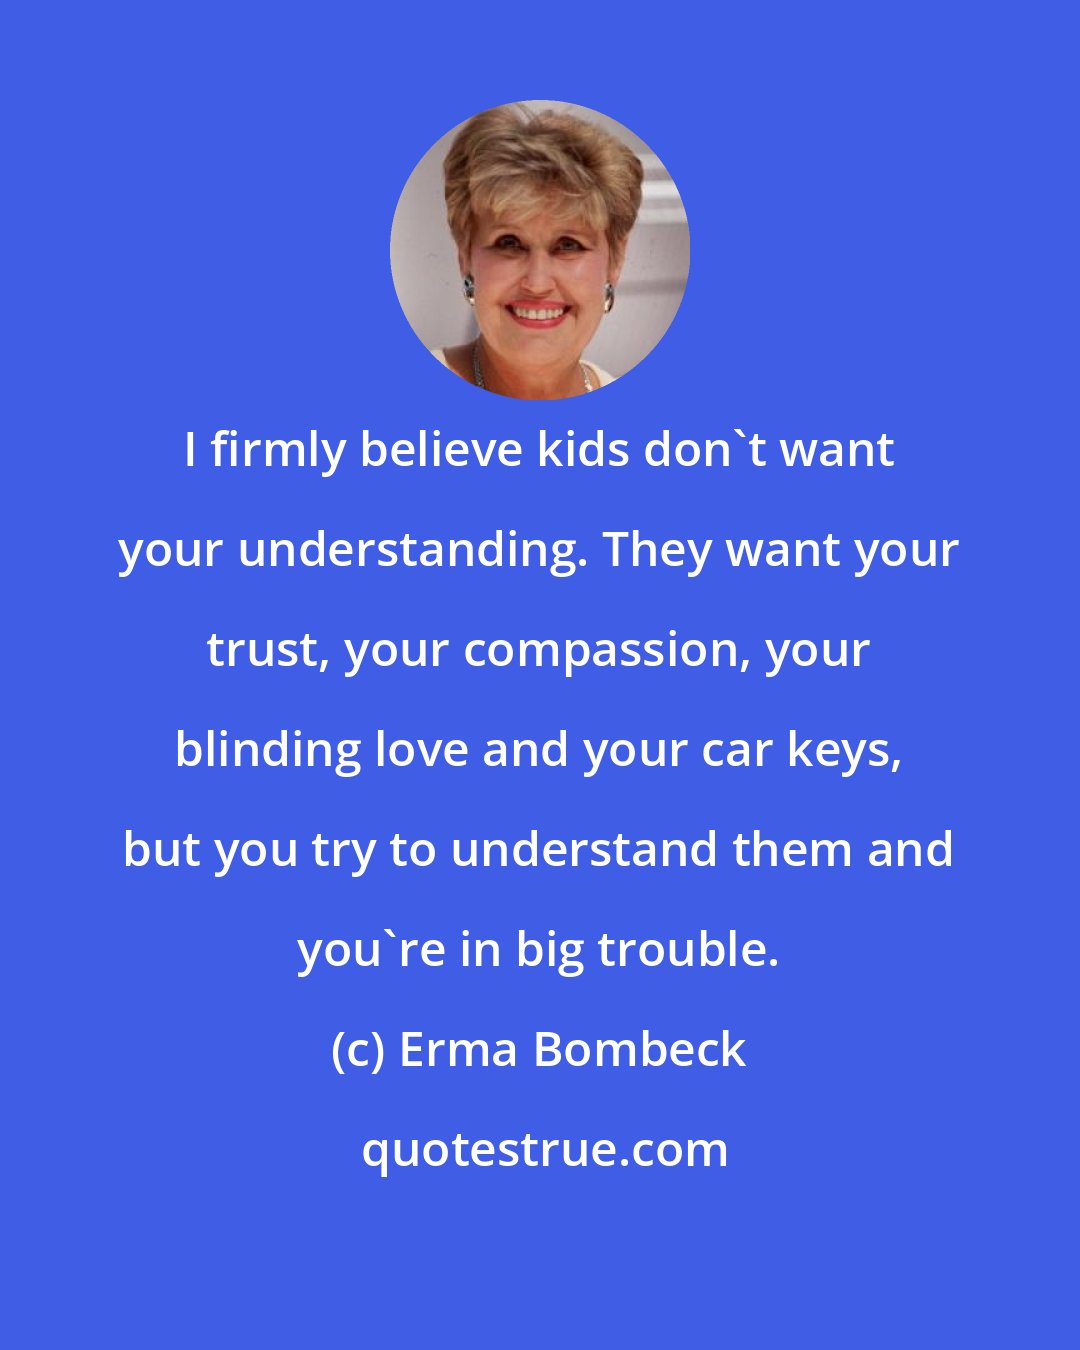 Erma Bombeck: I firmly believe kids don't want your understanding. They want your trust, your compassion, your blinding love and your car keys, but you try to understand them and you're in big trouble.